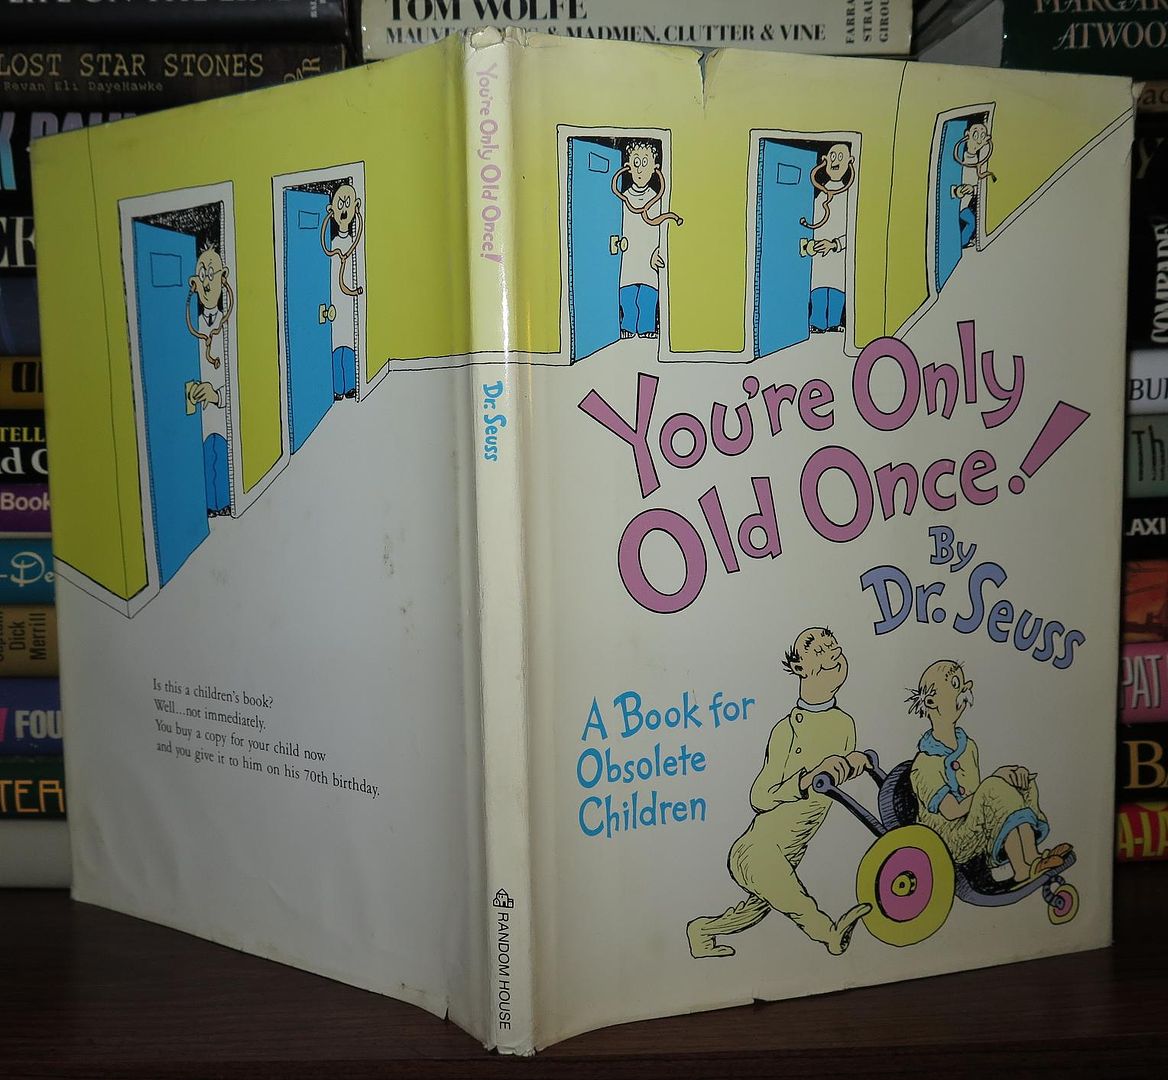 DR. SEUSS - THEODOR GEISEL - You'Re Only Old Once! a Book for Obsolete Children